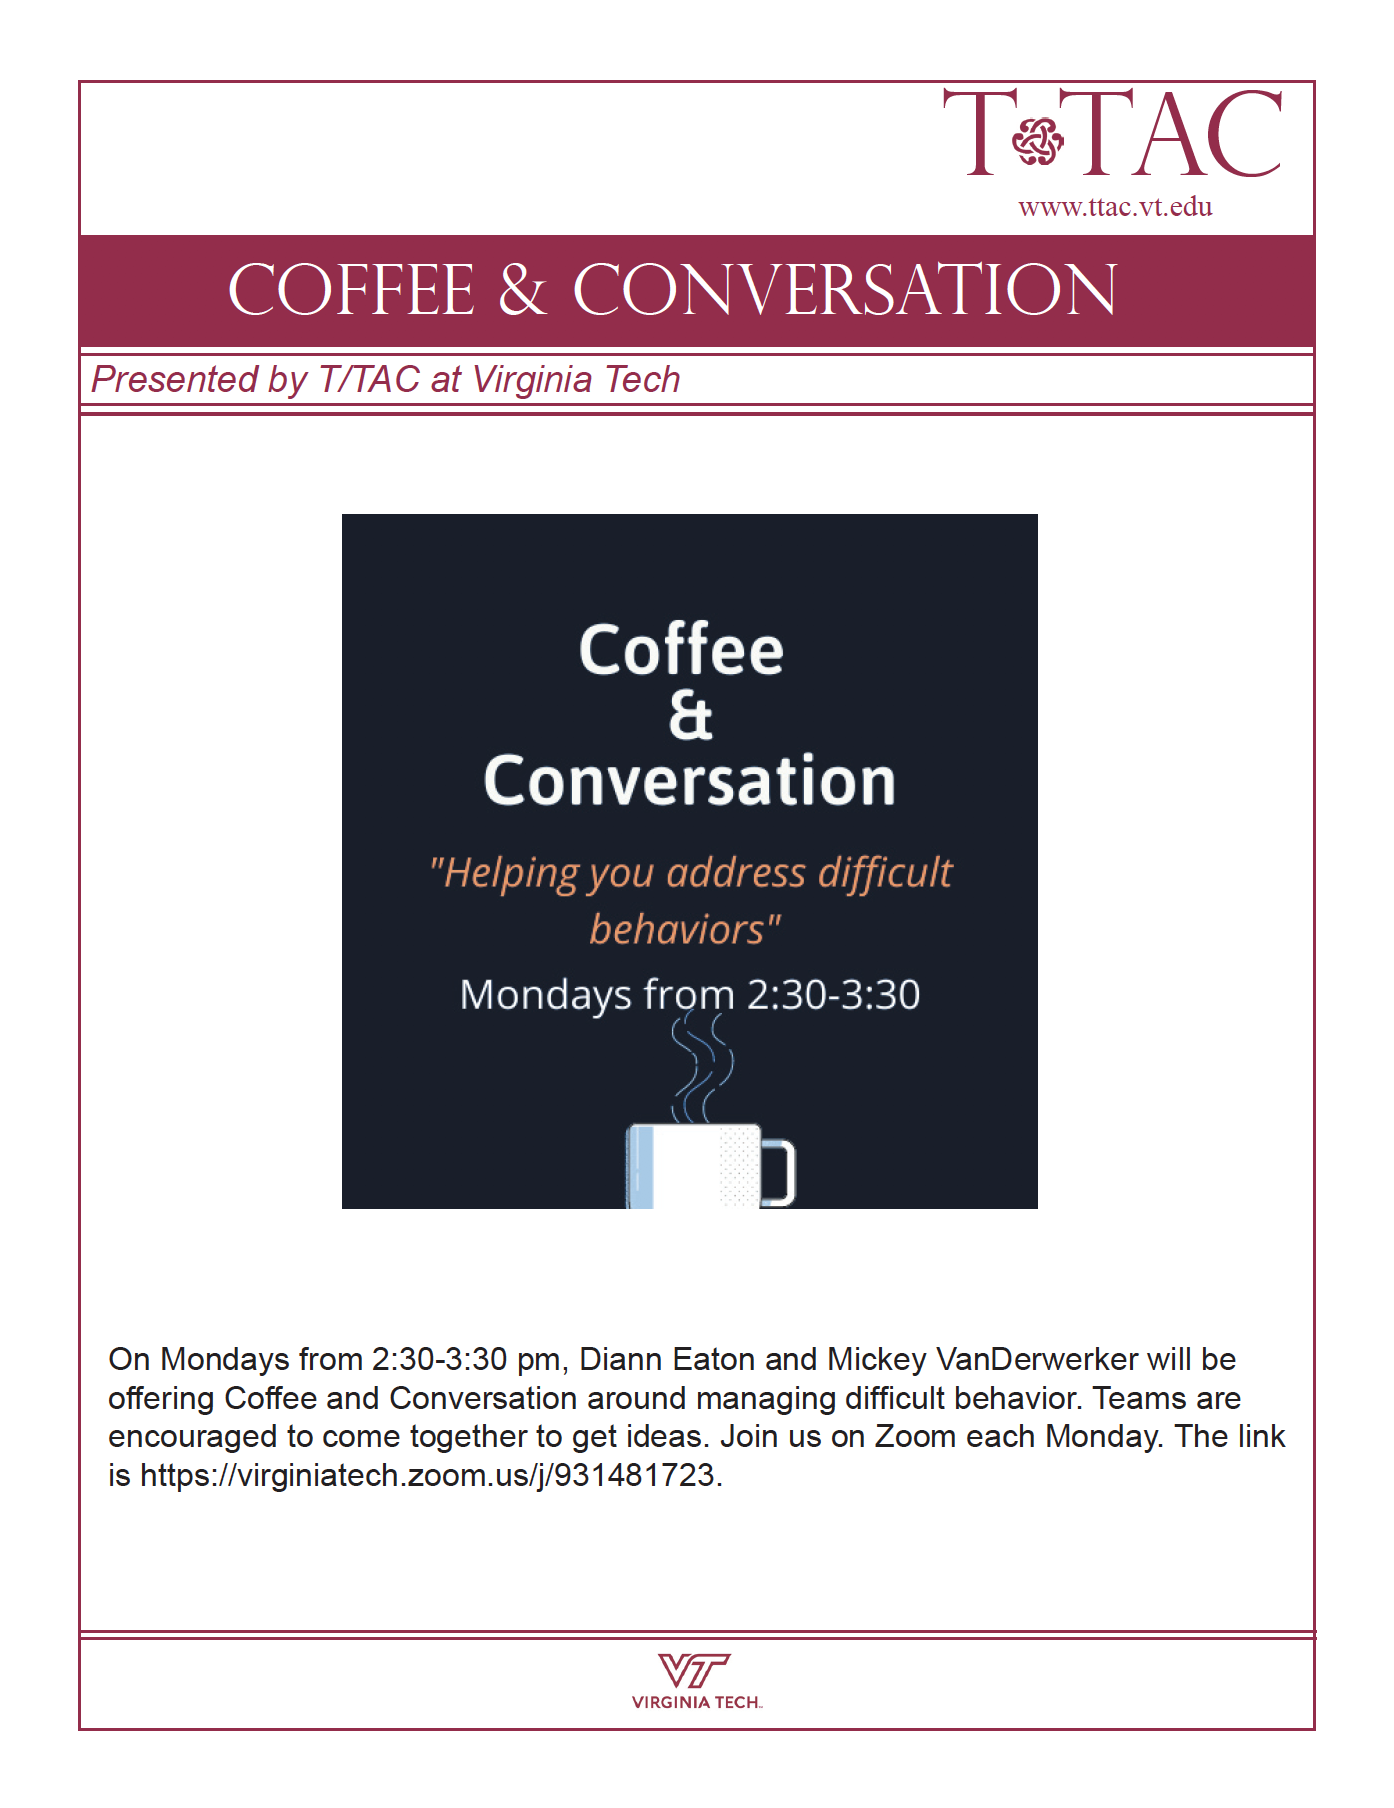 Coffee and Conversation Event Flier